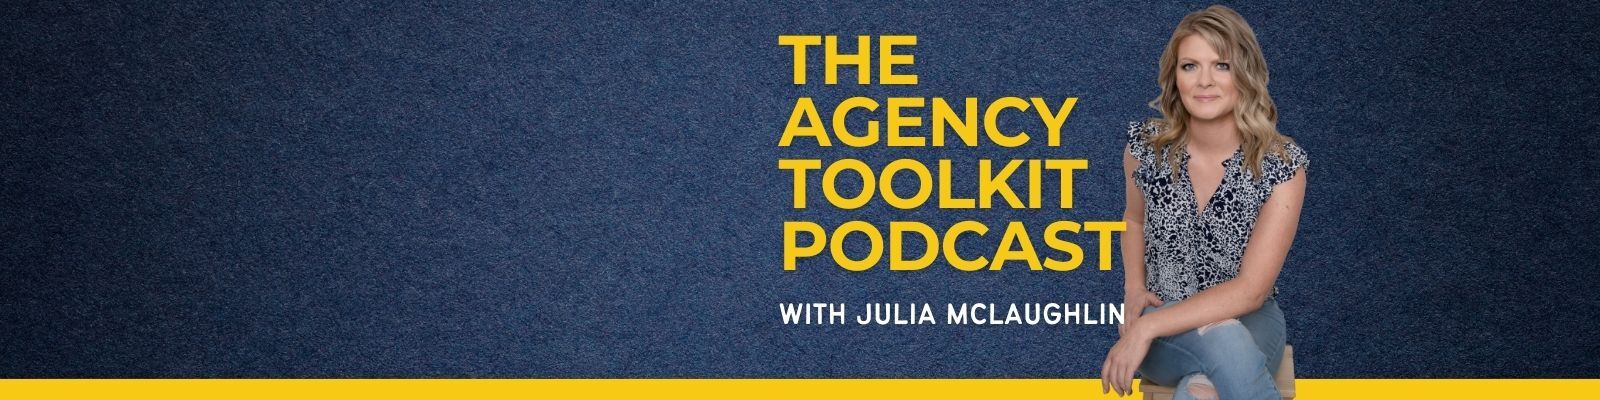 The Agency Toolkit